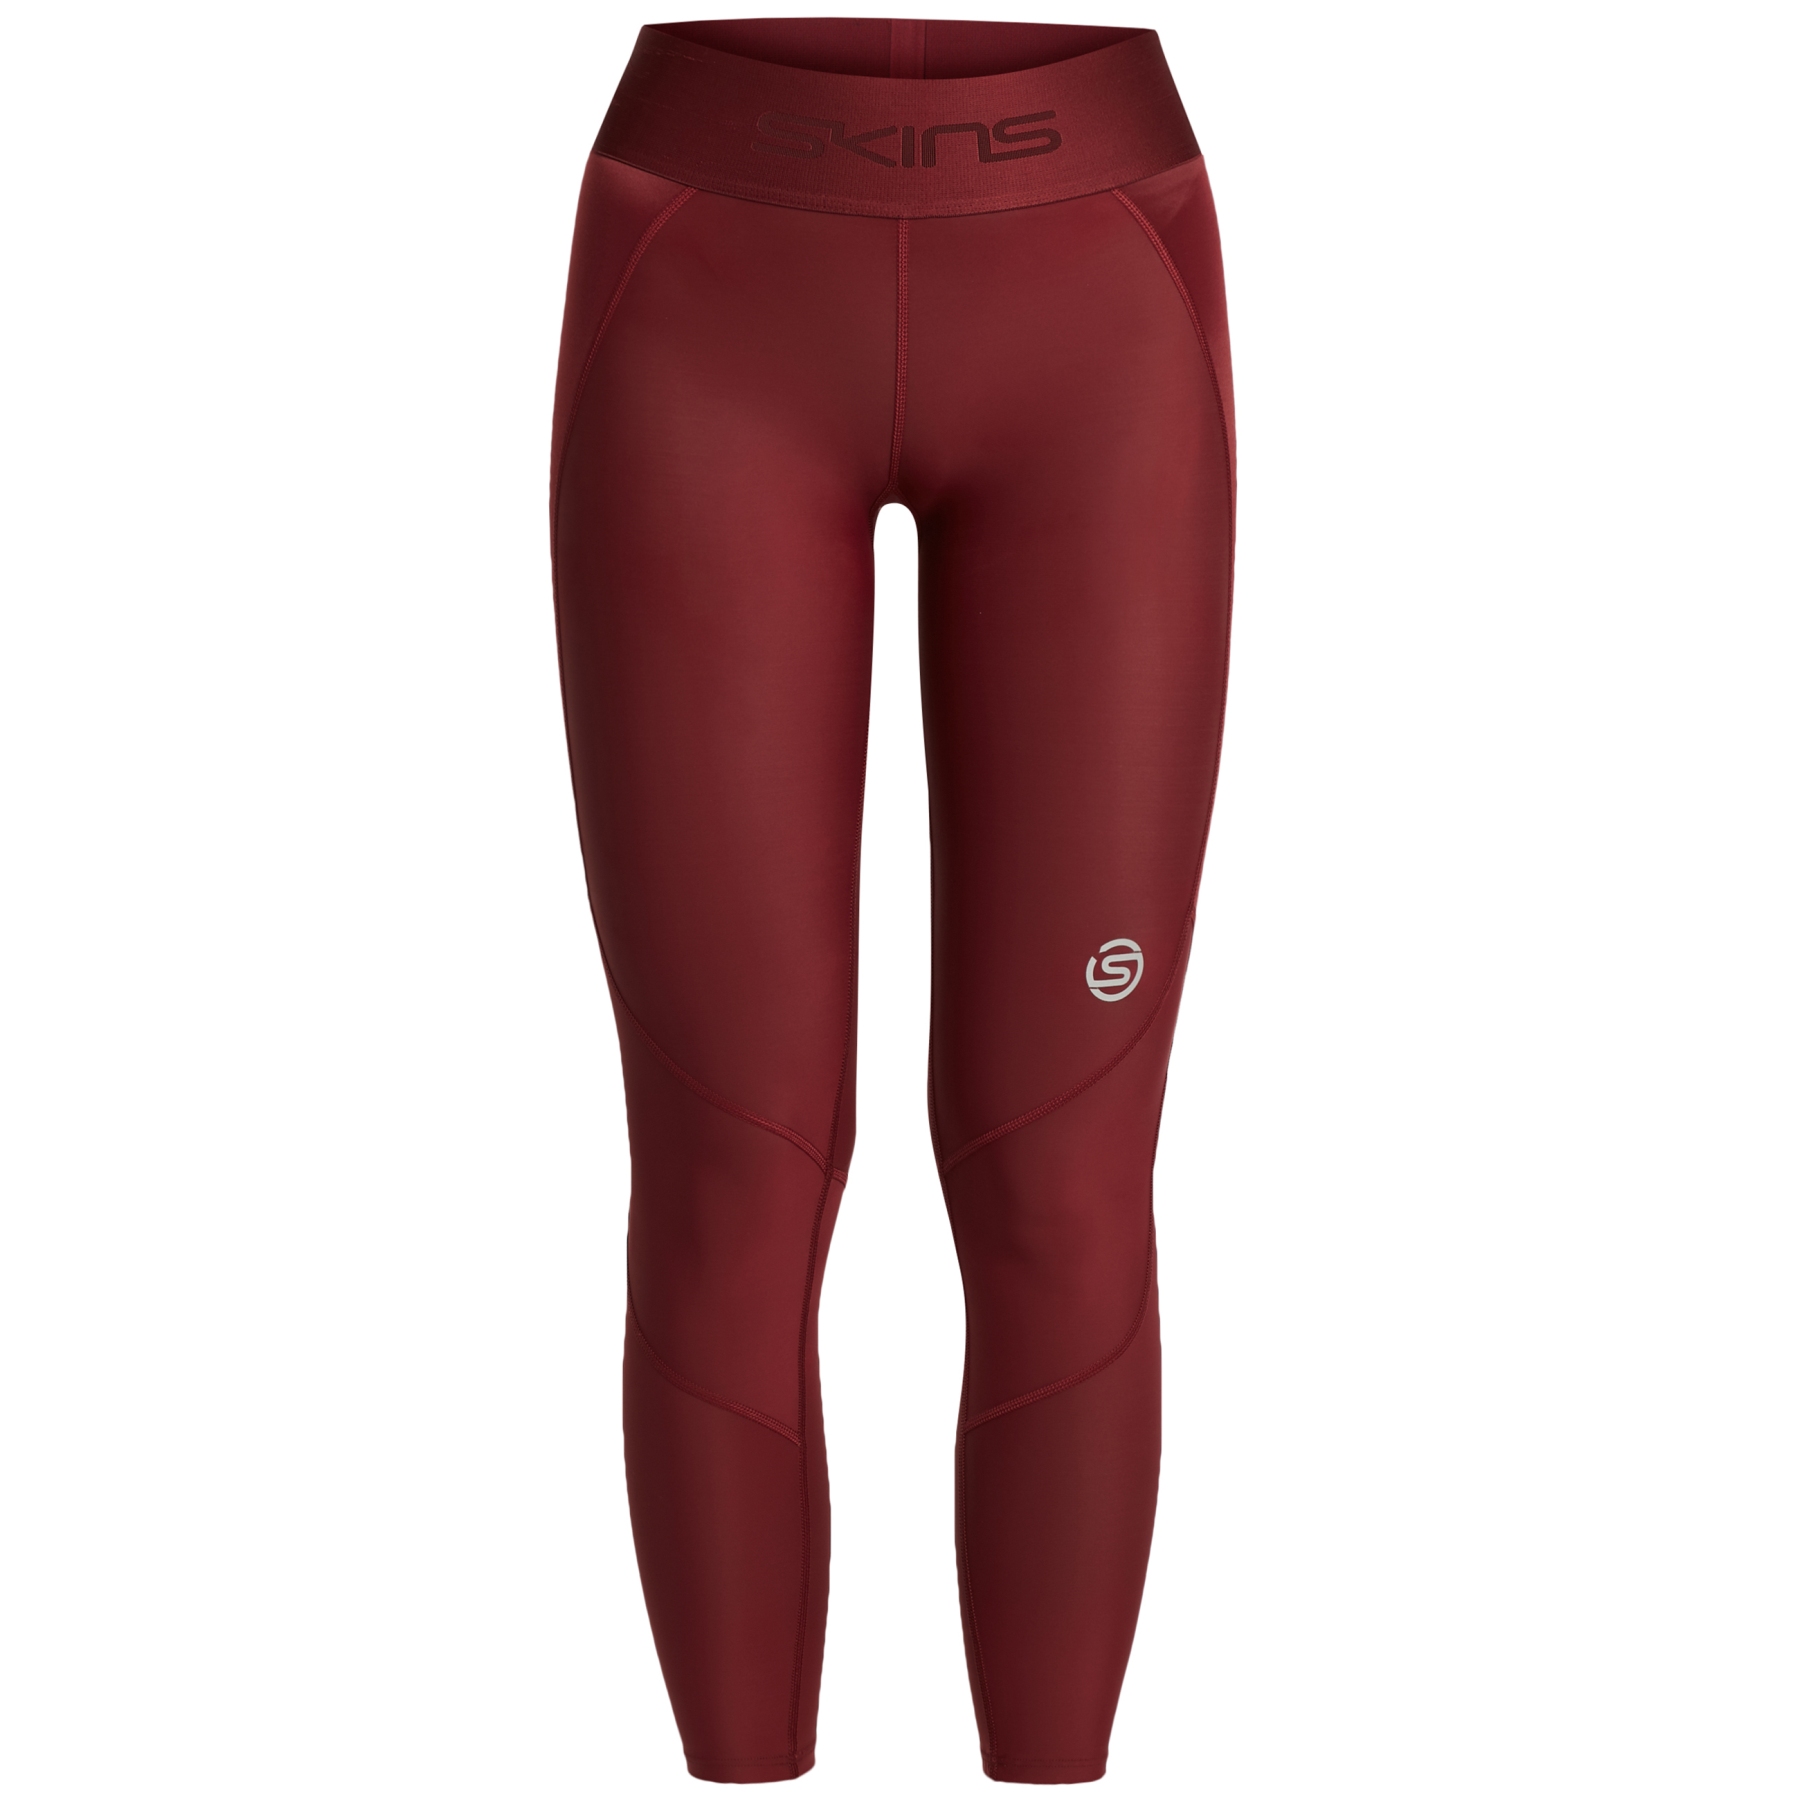 Picture of SKINS Compression 3-Series 7/8 Long Tights Women - Burgundy